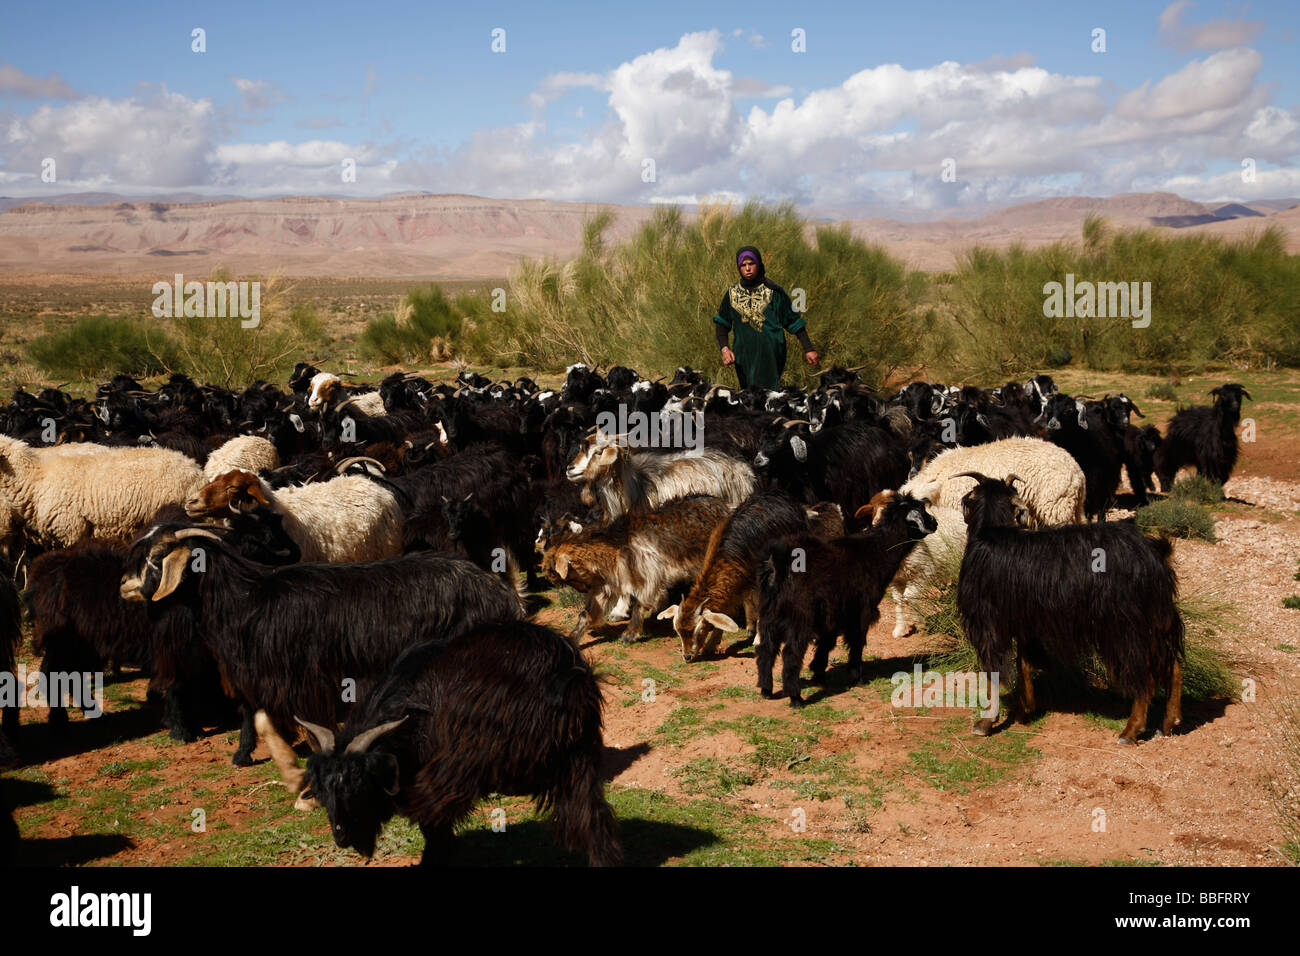 Africa, North Africa, Morocco, High Atlas Mountains, Dades Valley, Berber Woman Tending Sheep and Goats Stock Photo